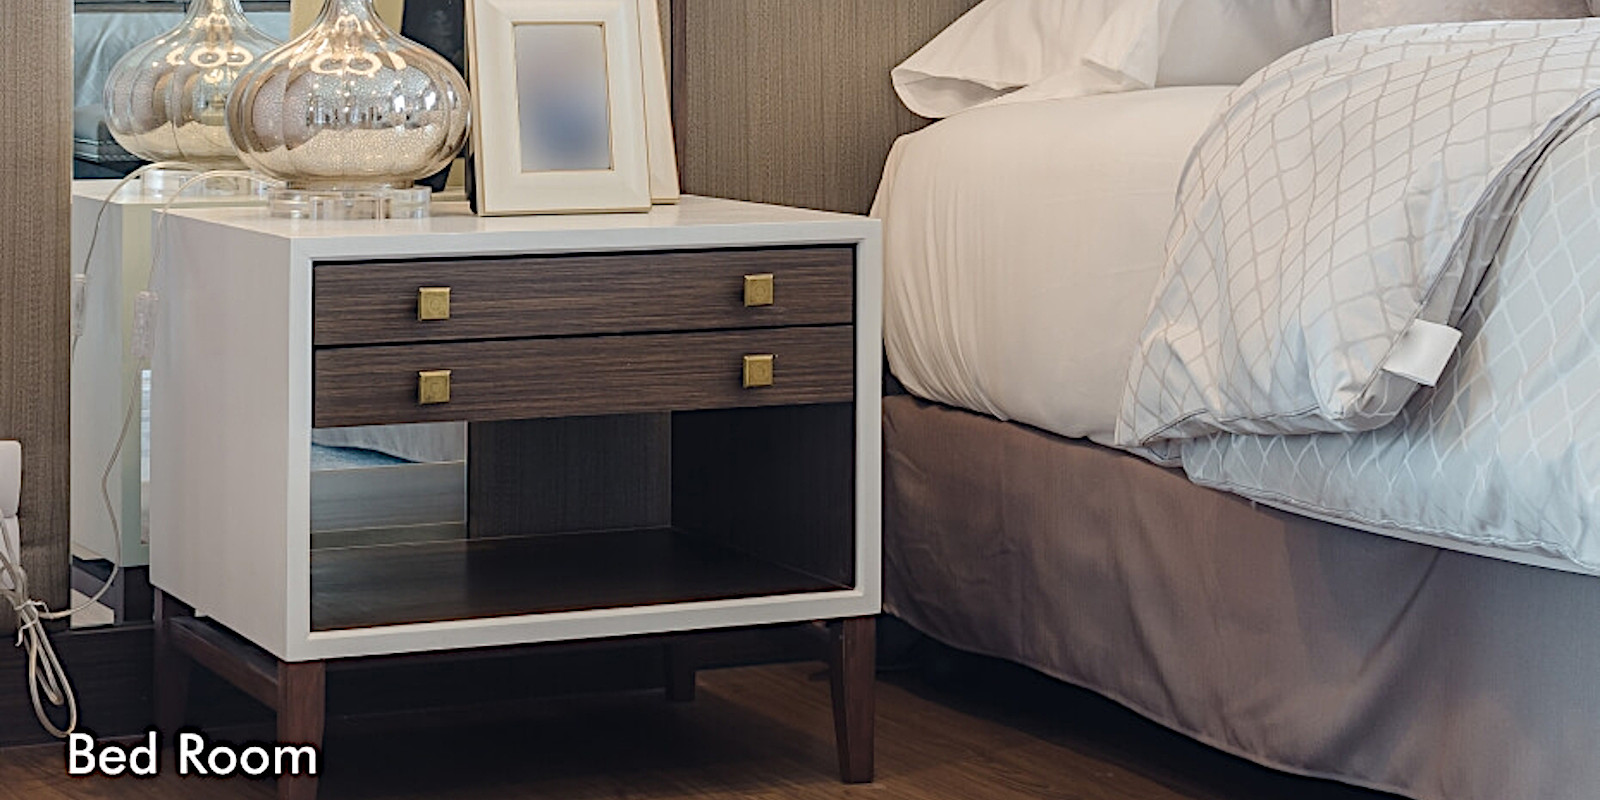 Bedroom furniture competitive price